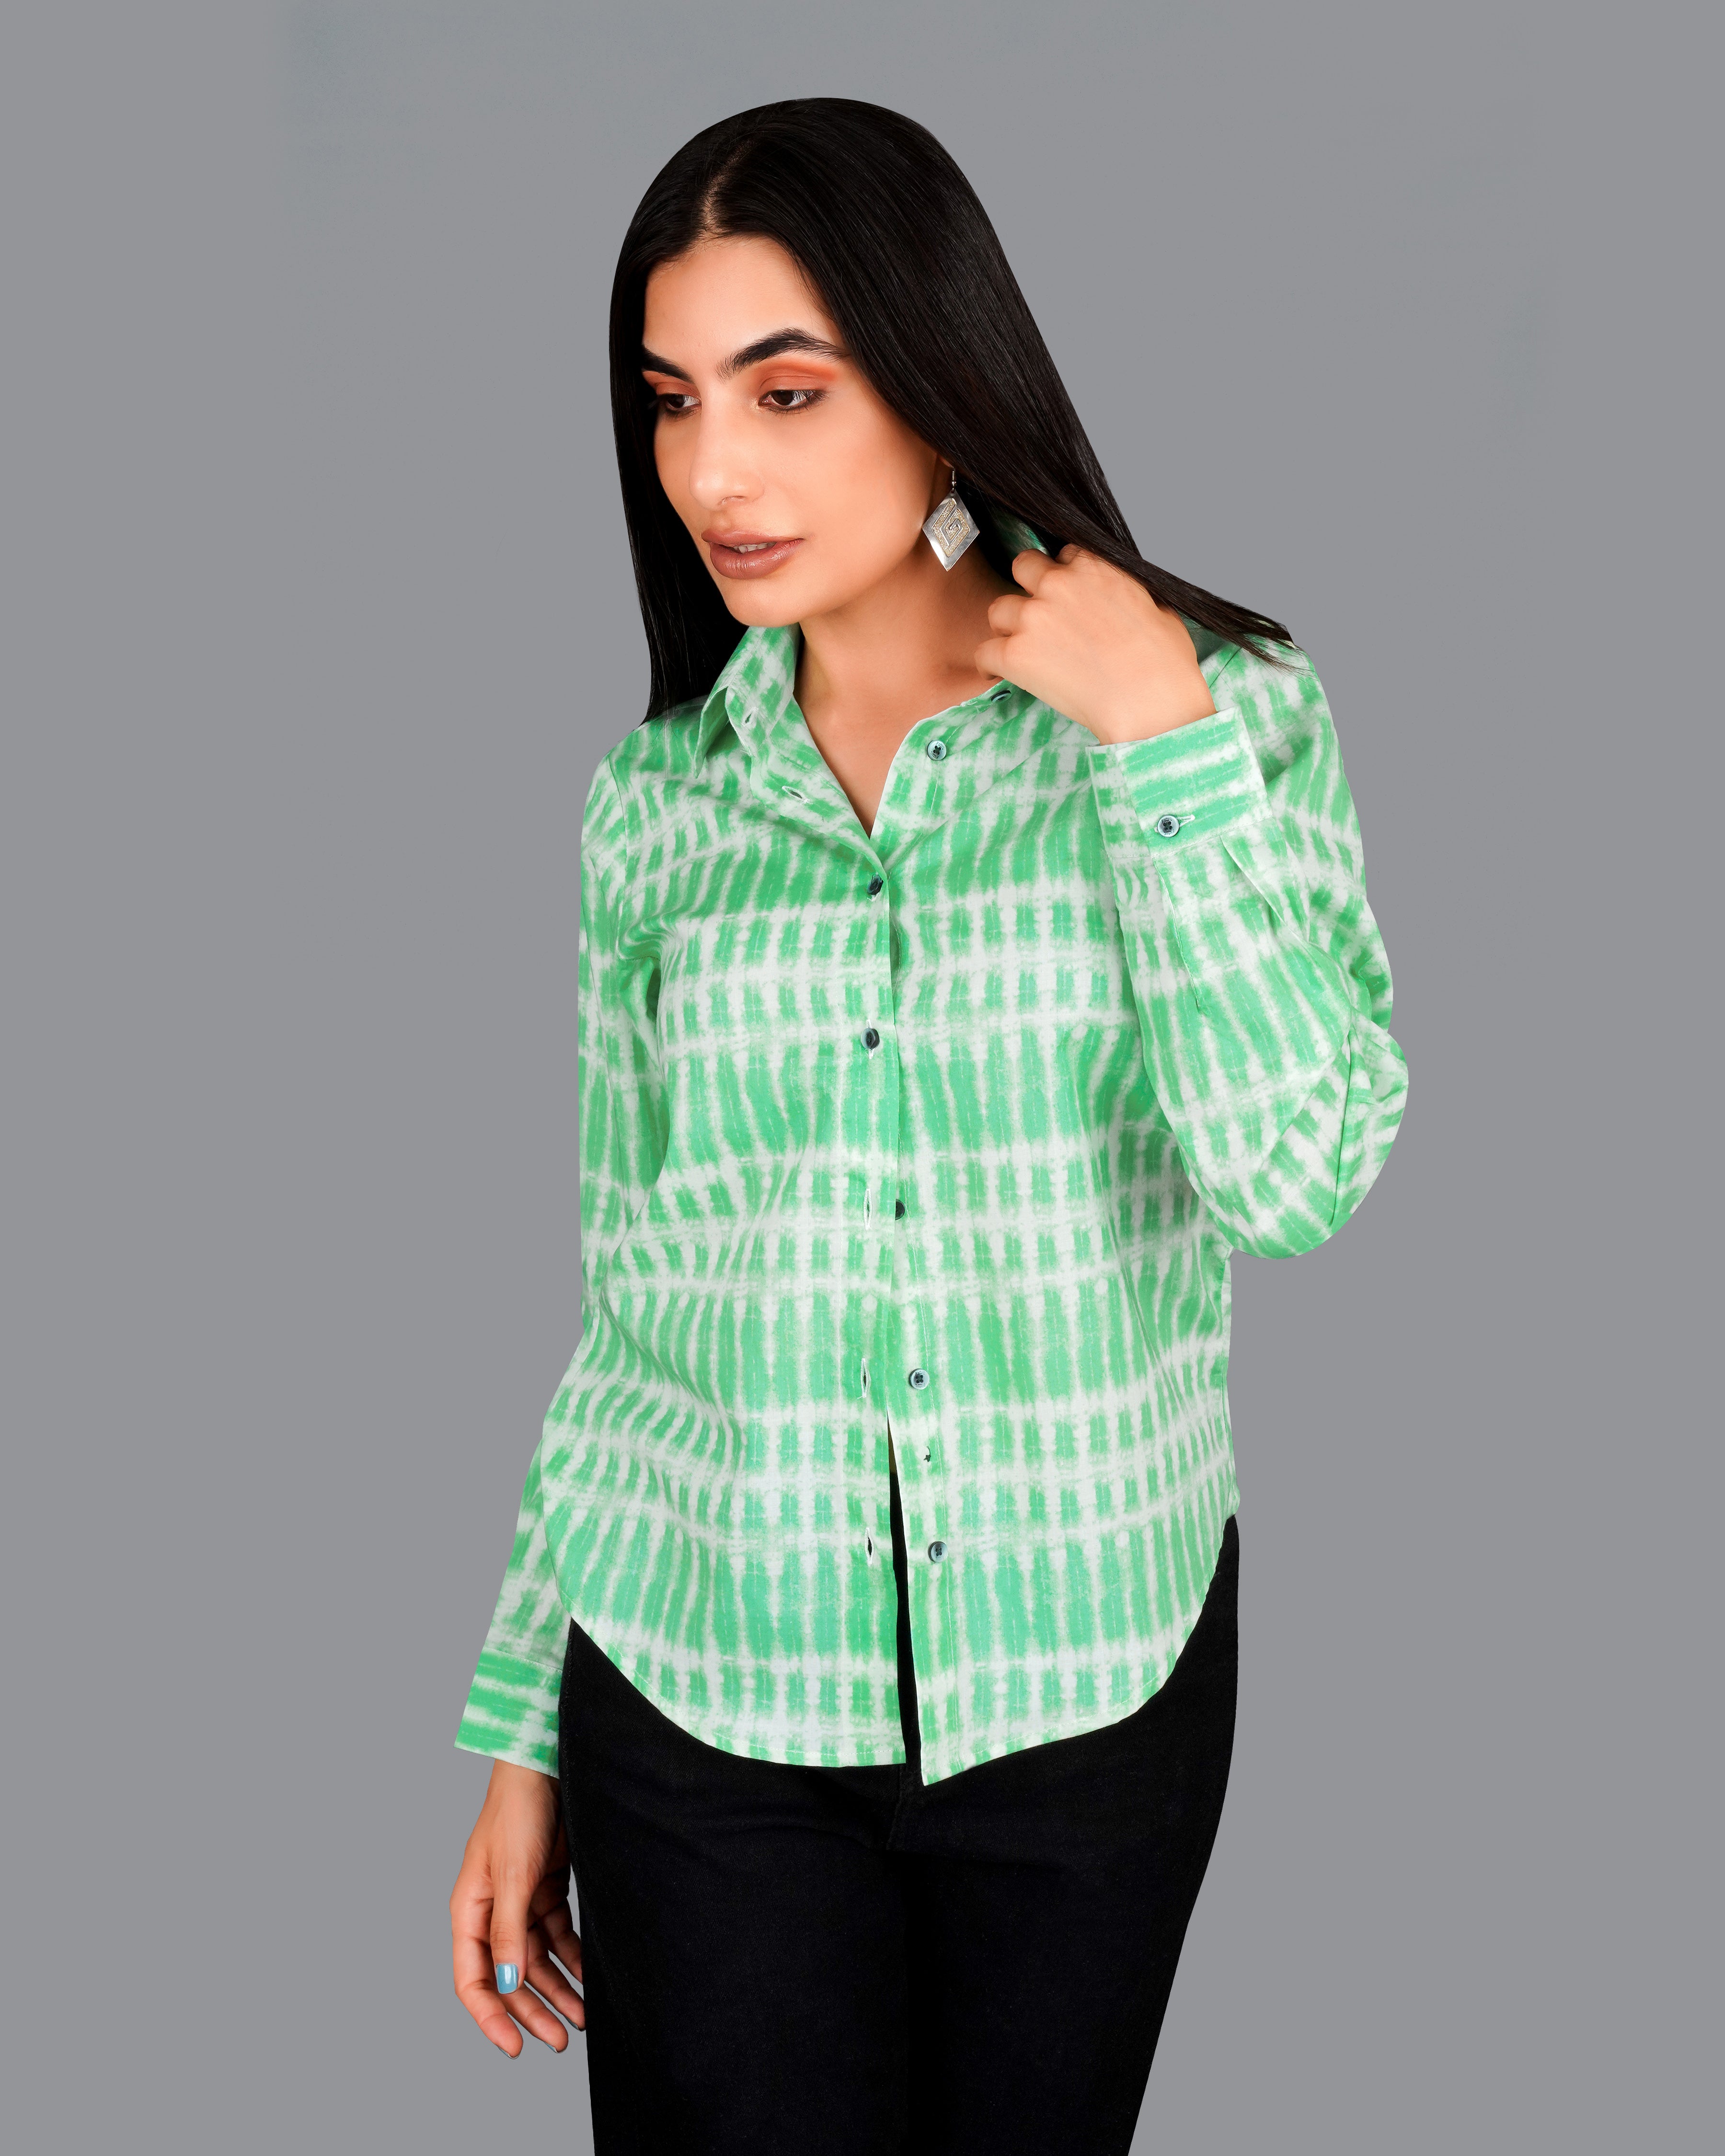 Teal Green with Bright White Printed Premium Tencel Shirt WS027-BLK-32, WS027-BLK-34, WS027-BLK-36, WS027-BLK-38, WS027-BLK-40, WS027-BLK-42